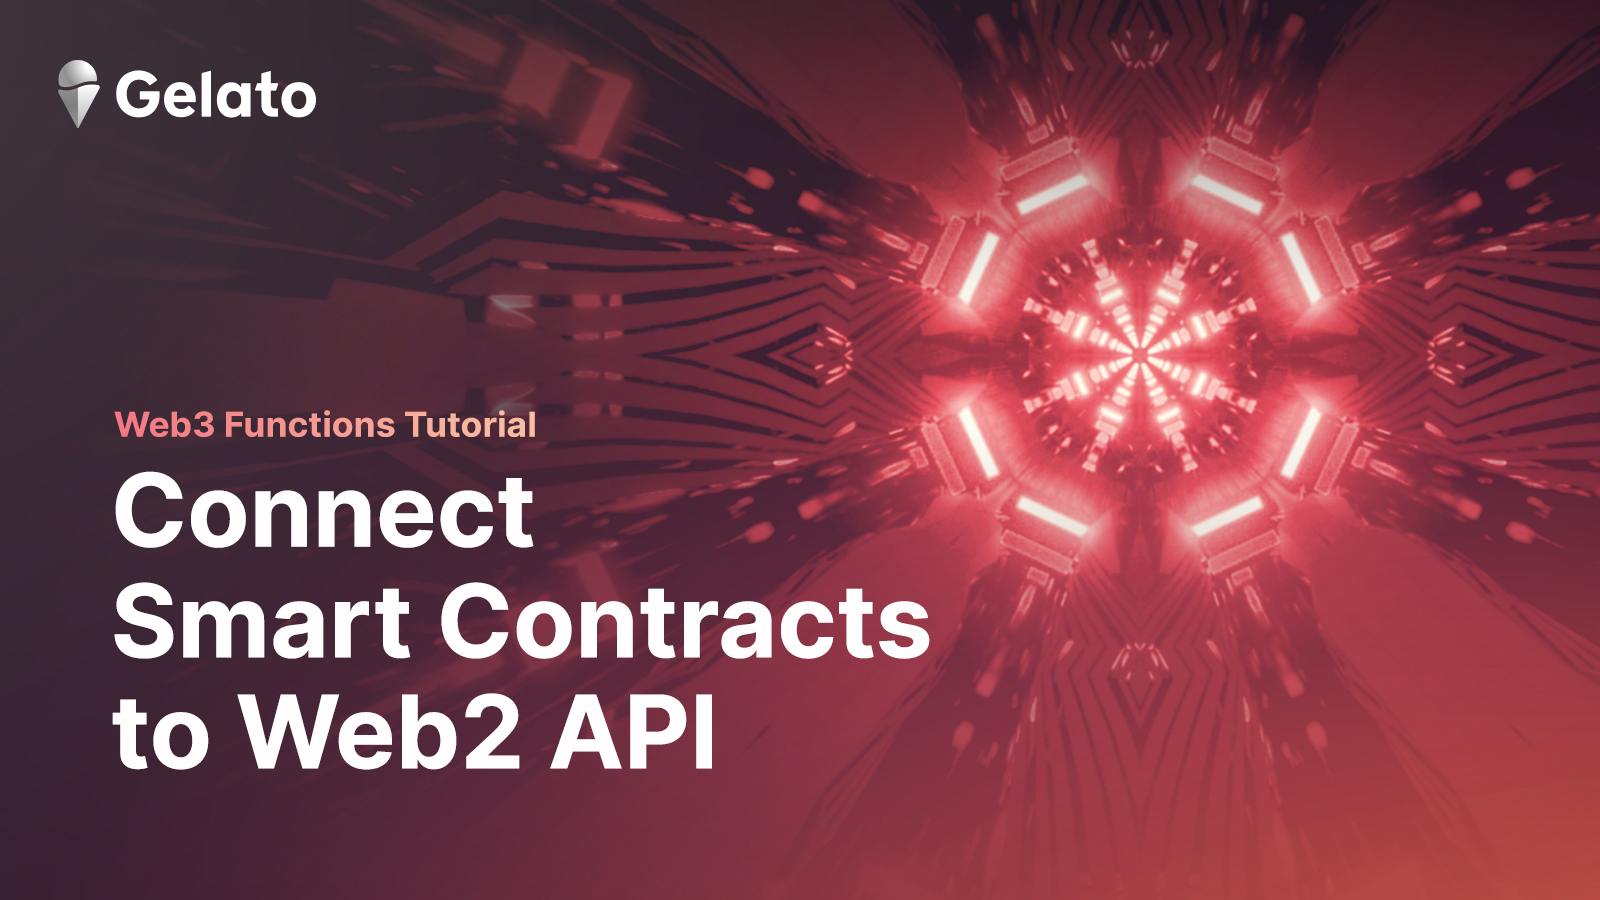 Connect Smart Contracts to Web2 API with Gelato Web3 Functions